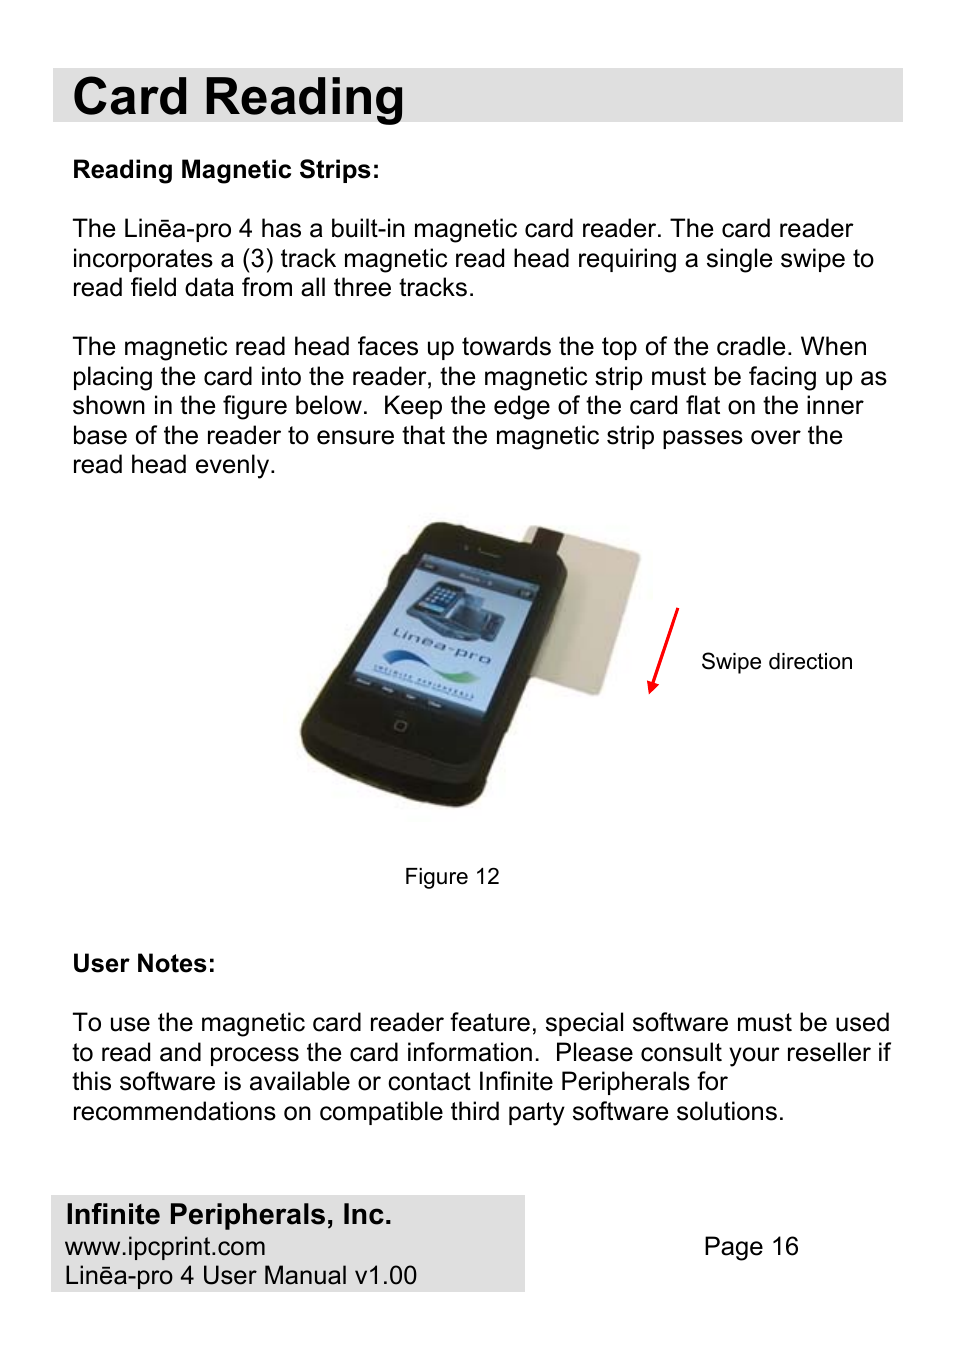 Card reading | Infinite Peripherals PRO 4 User Manual | Page 16 / 24